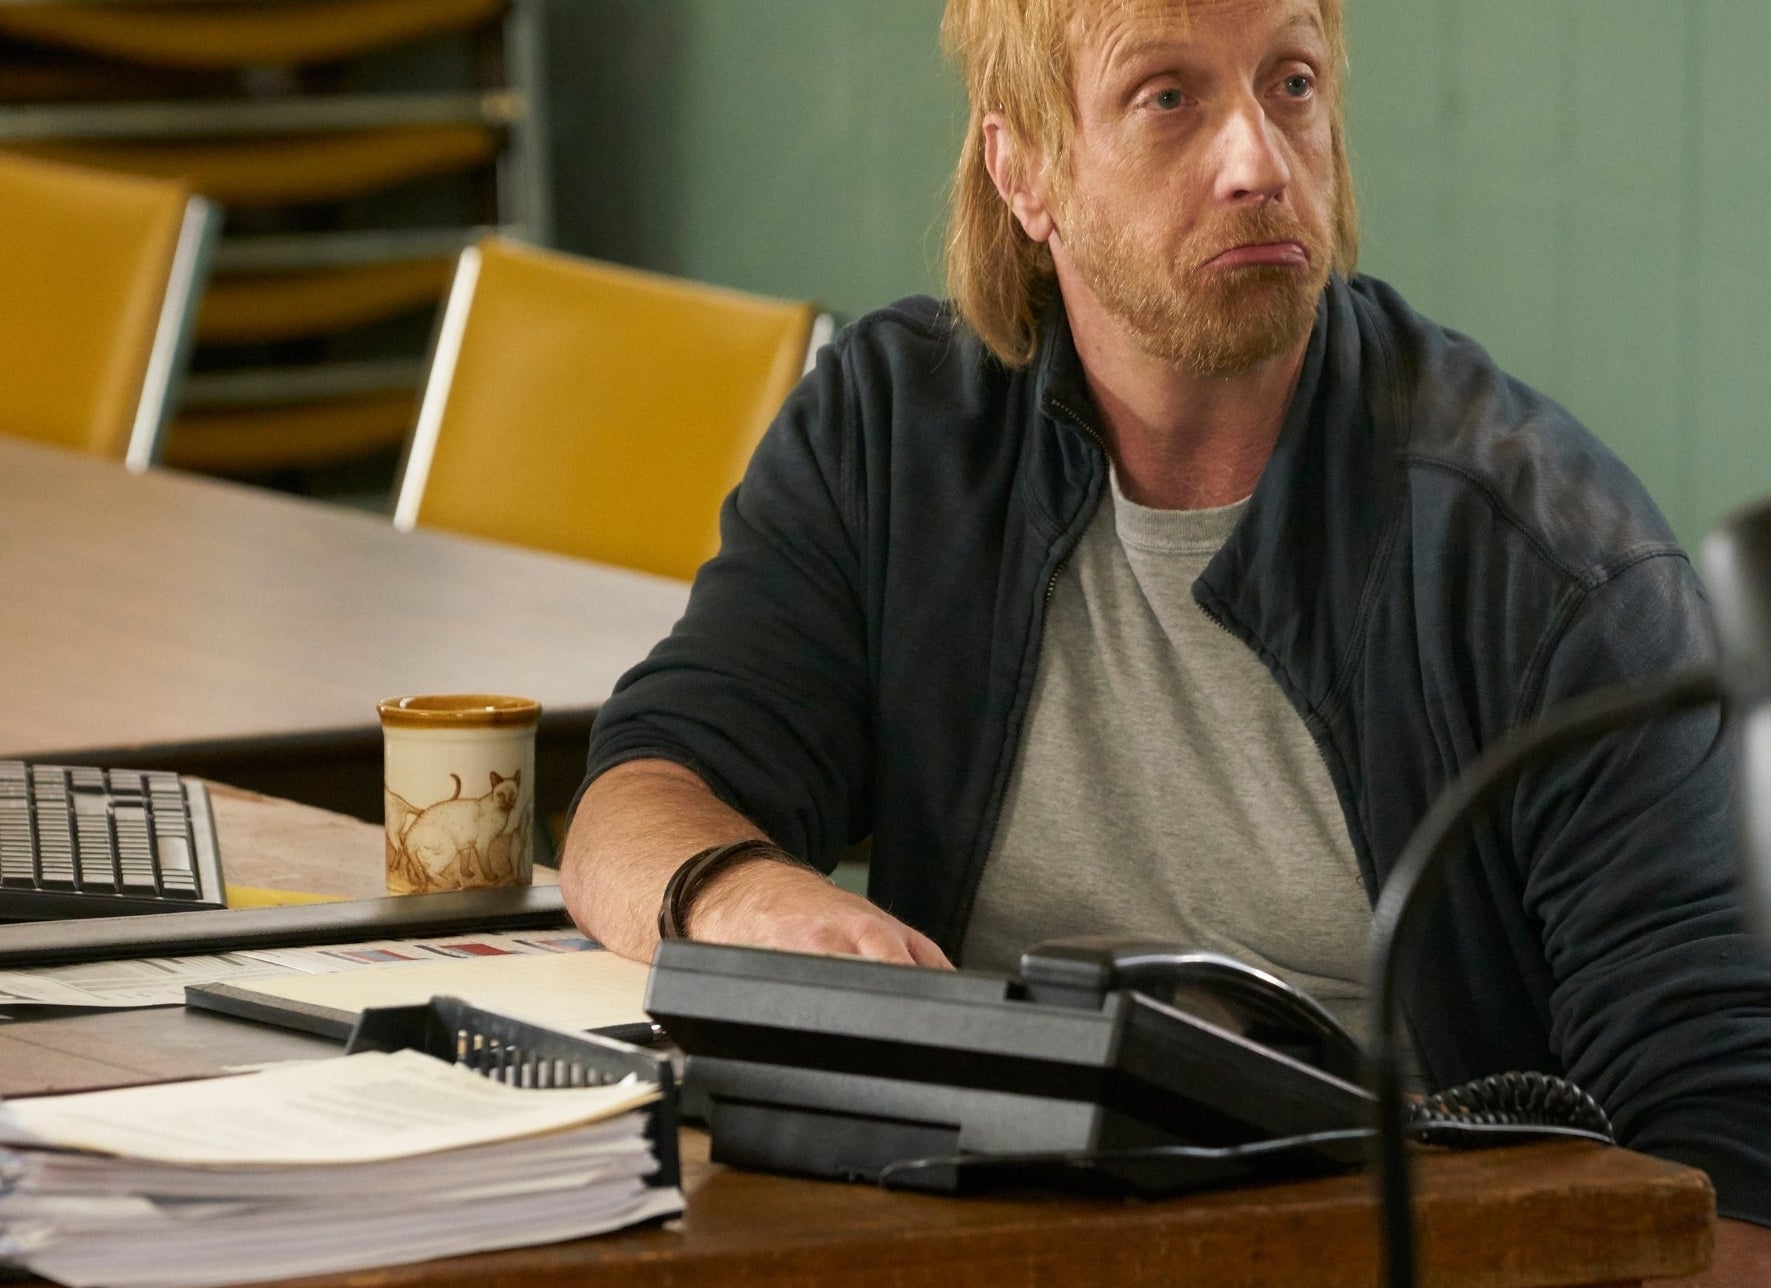 Man sitting at a desk with phones, looking pensive in a TV show scene